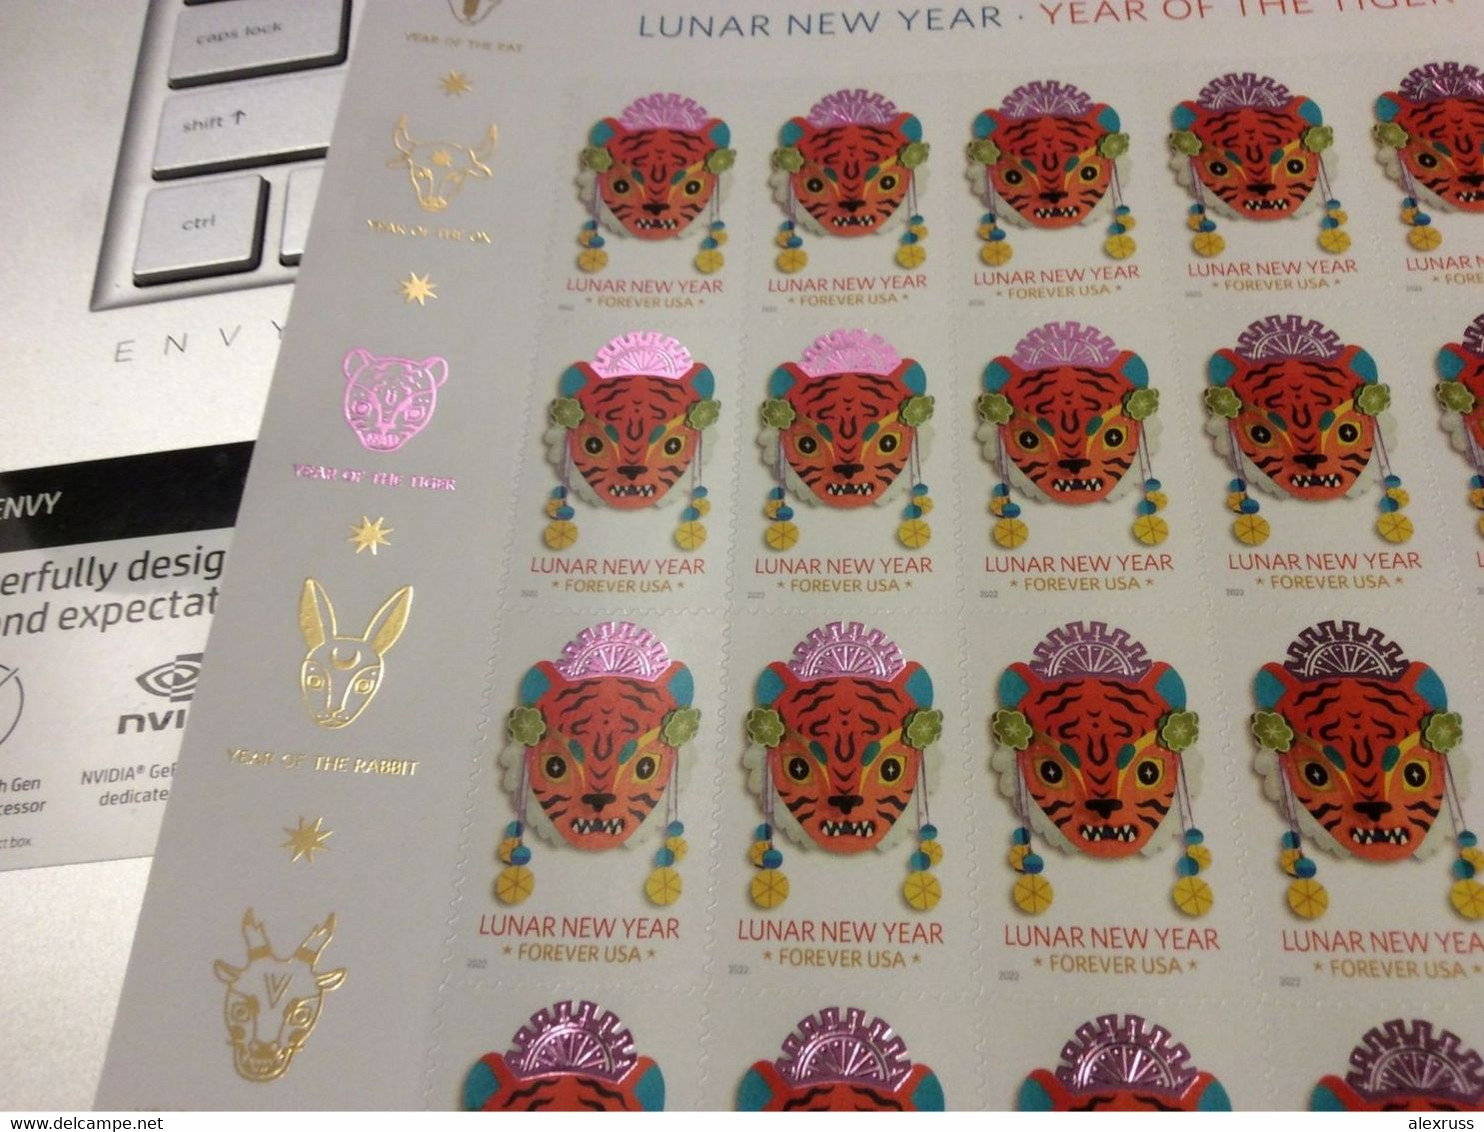 US 2022 Chinese Lunar New Year Series: Year of the Tiger, Sheet of 20 Forever Stamps, Special Printing, VF MNH**